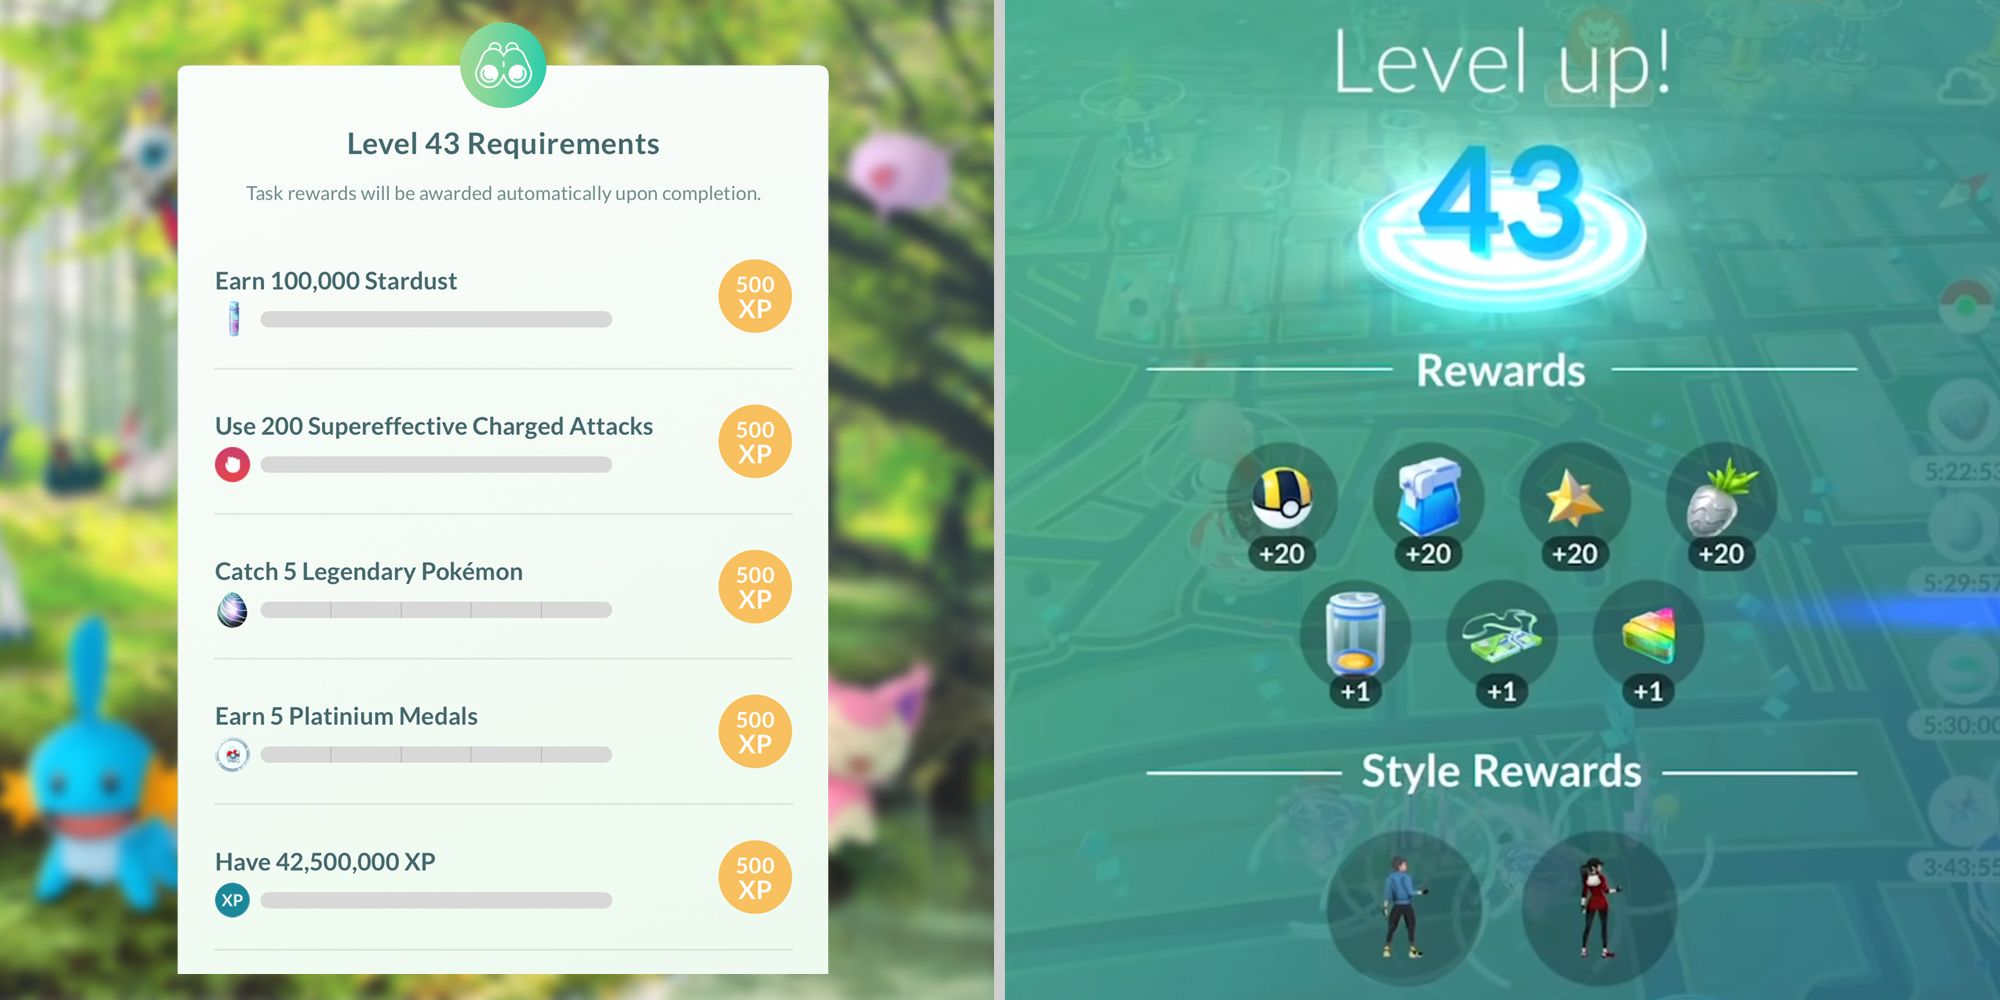 Requirements and rewards for level 43 in Pokemon Go